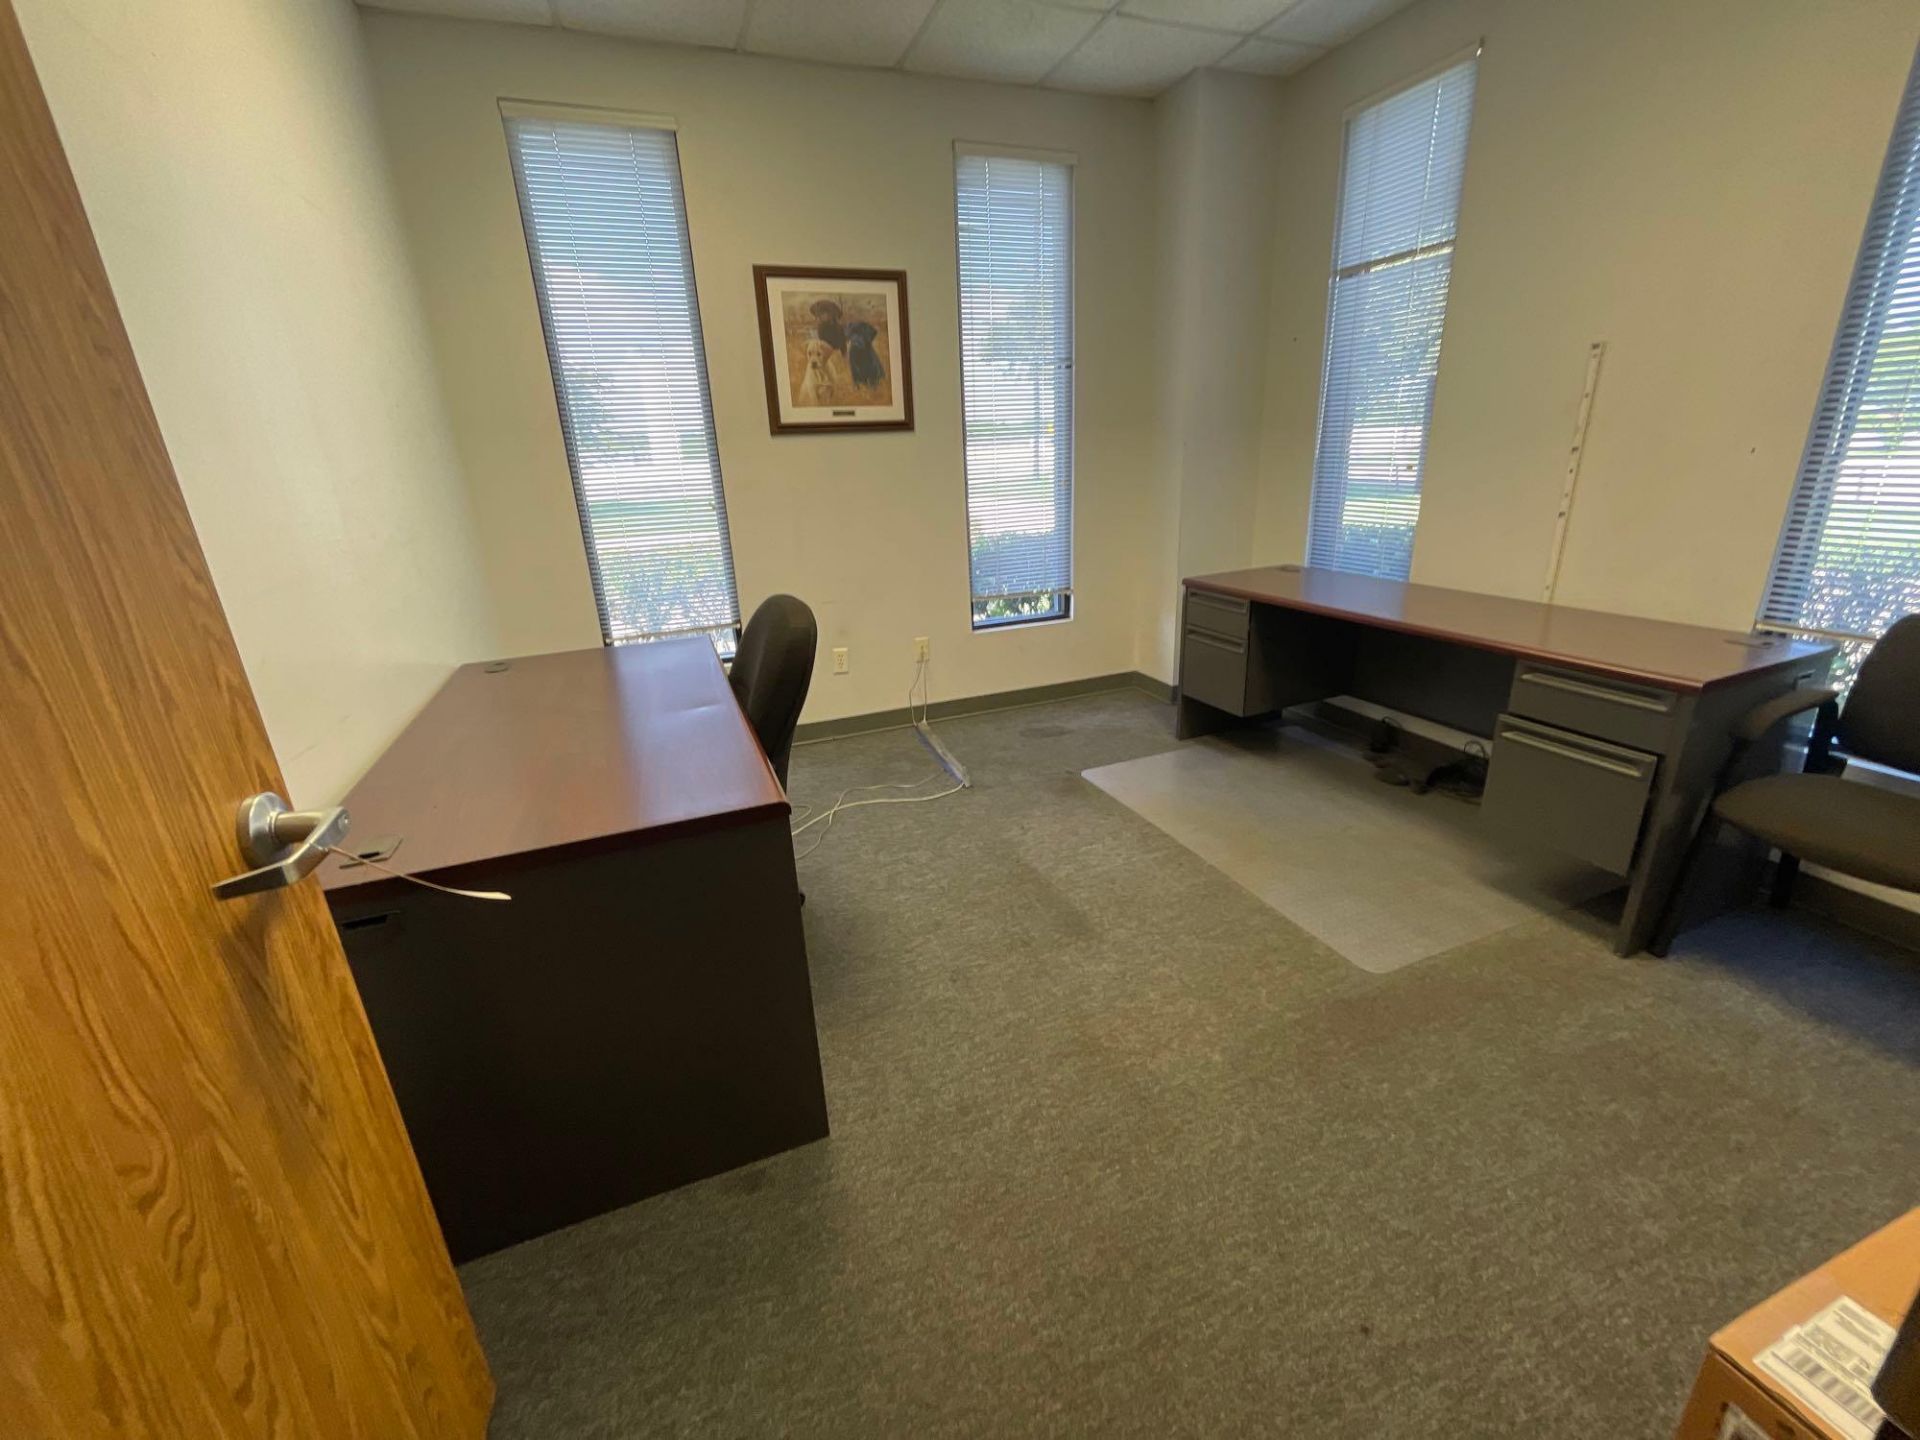 Office Furniture: Rooms 4, 5, 6: Desks, Chairs, Files - See Photo - Image 9 of 9